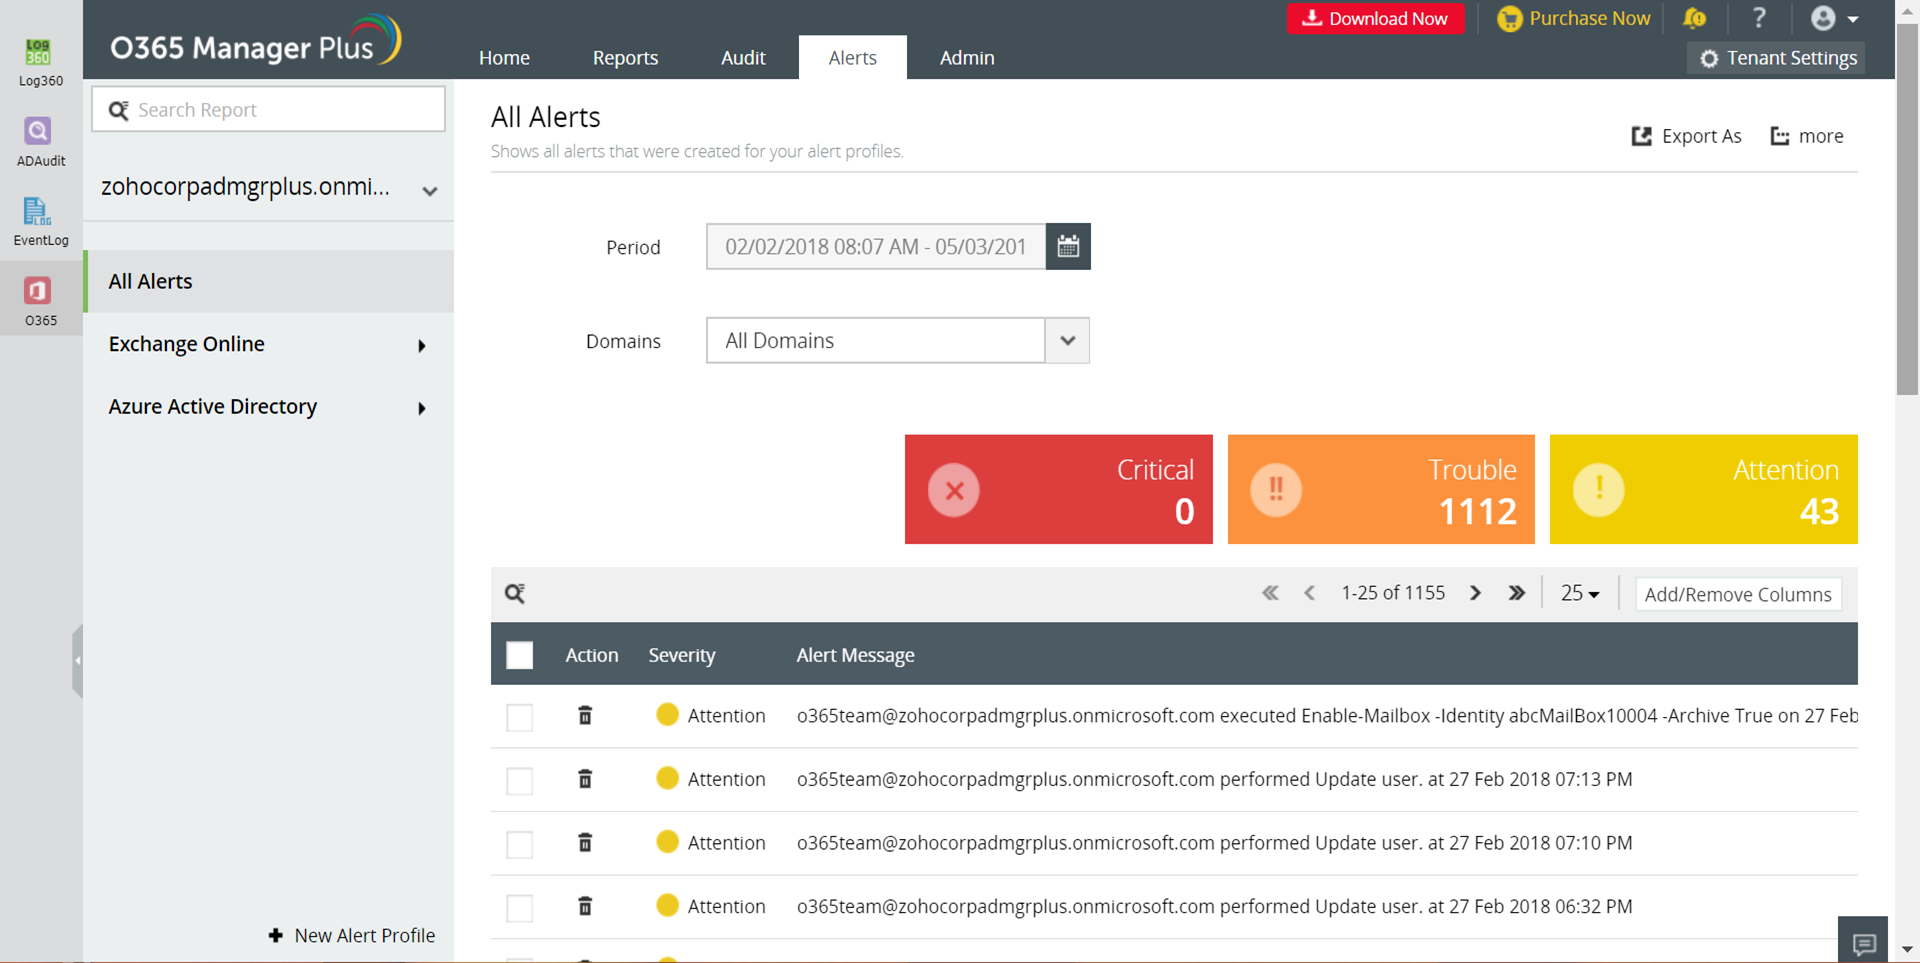 Microsoft 365 reporting, auditing and alerting with Log360